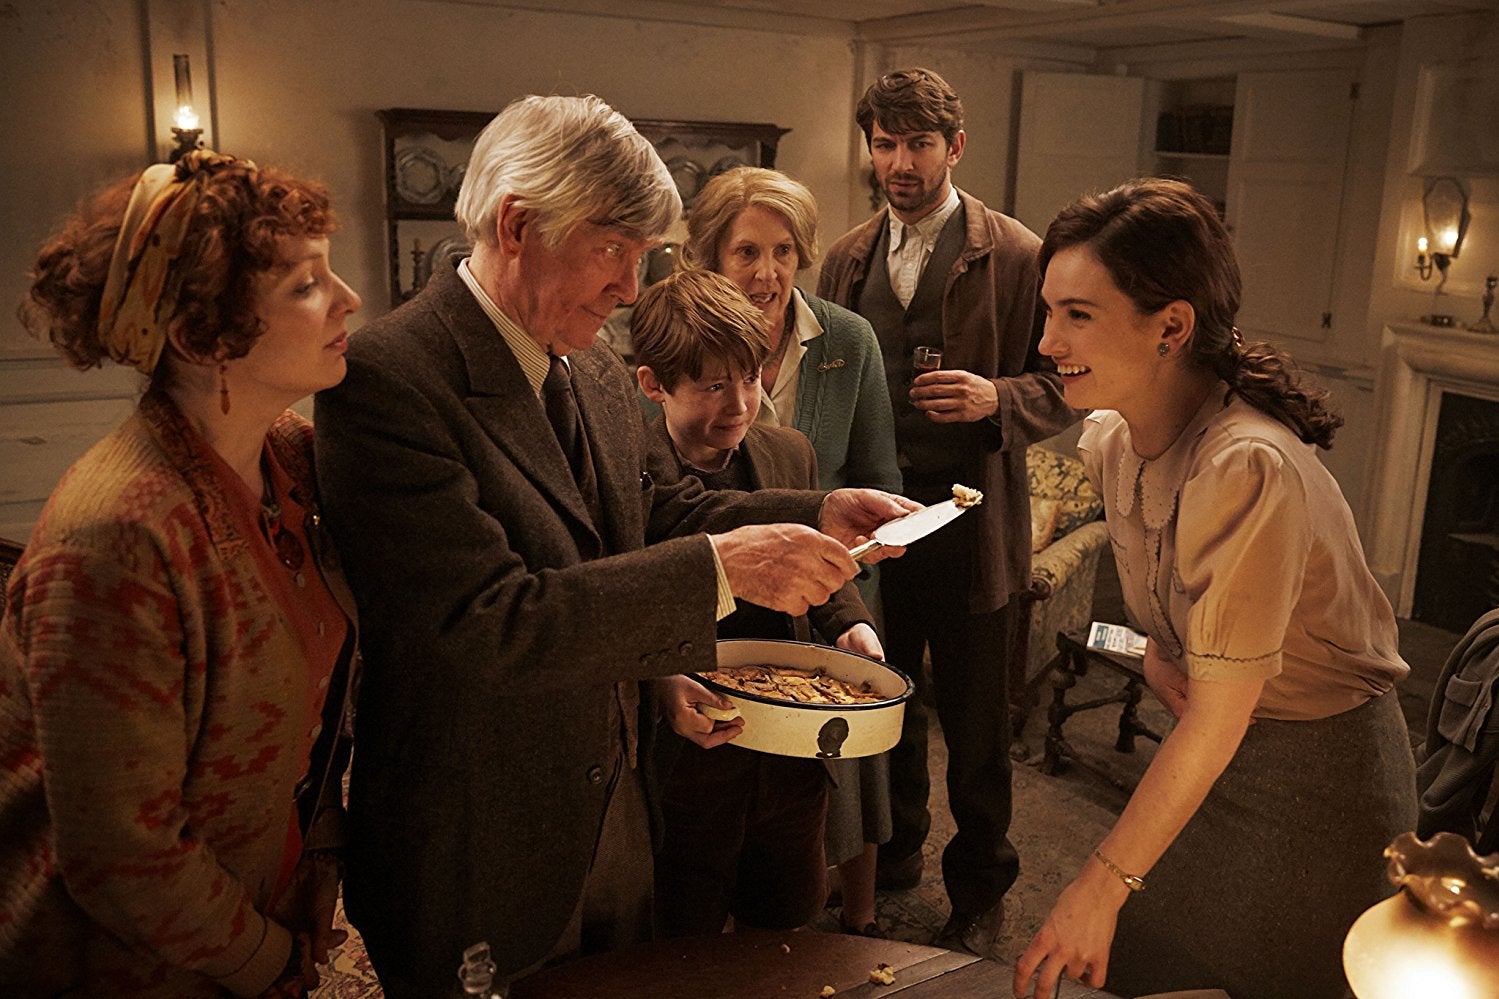 In a living room, Kit Connor holds a dish and Tom Courtenay offers Lily James a bite of food. They are standing in a living room with Michiel Huisman, Penelope Wilton, and Katherine Parkinson.